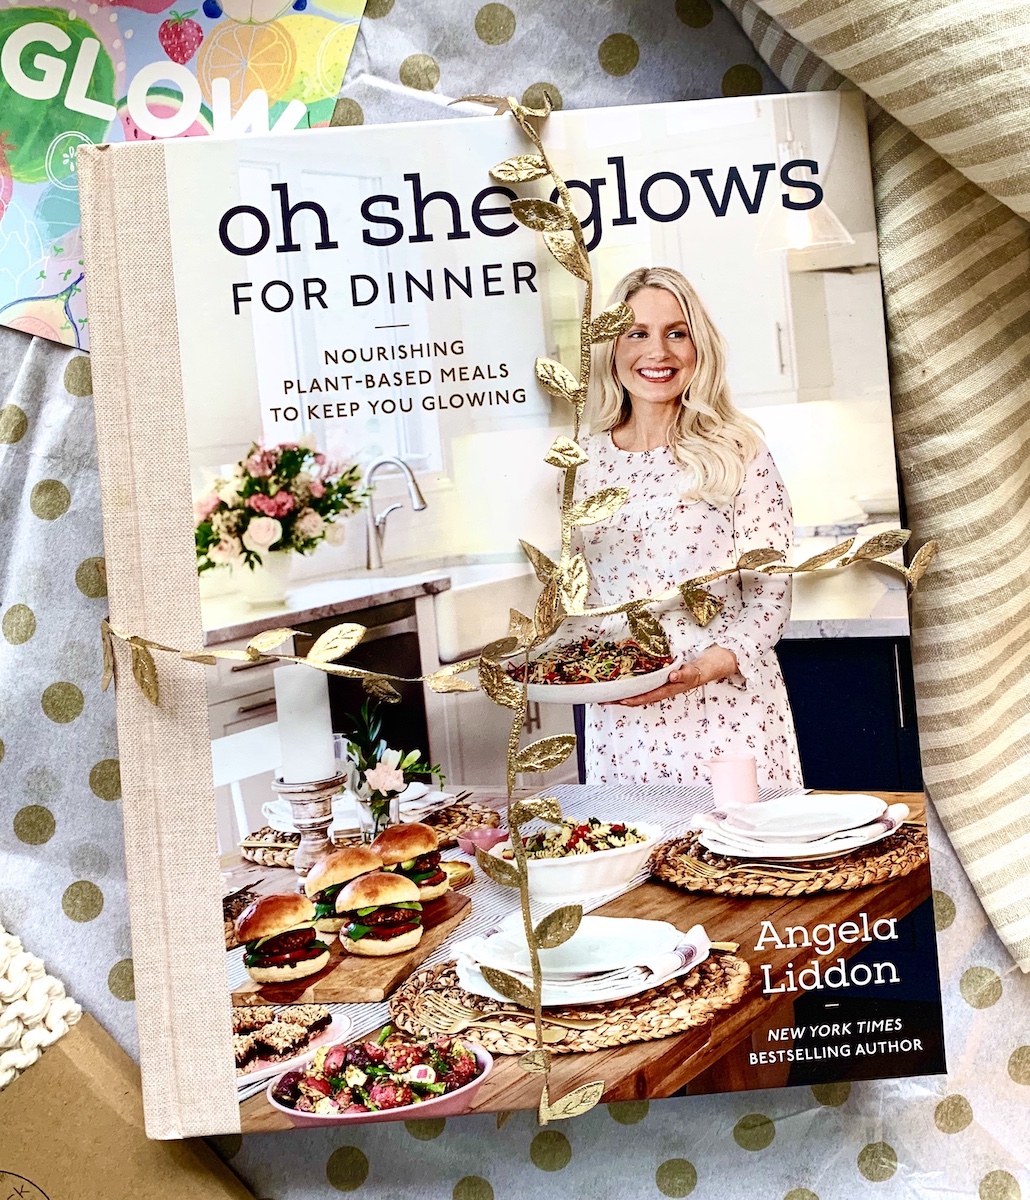 Image shows copy of 'Oh She Glows for Dinner' cookbook by Angela Liddon.